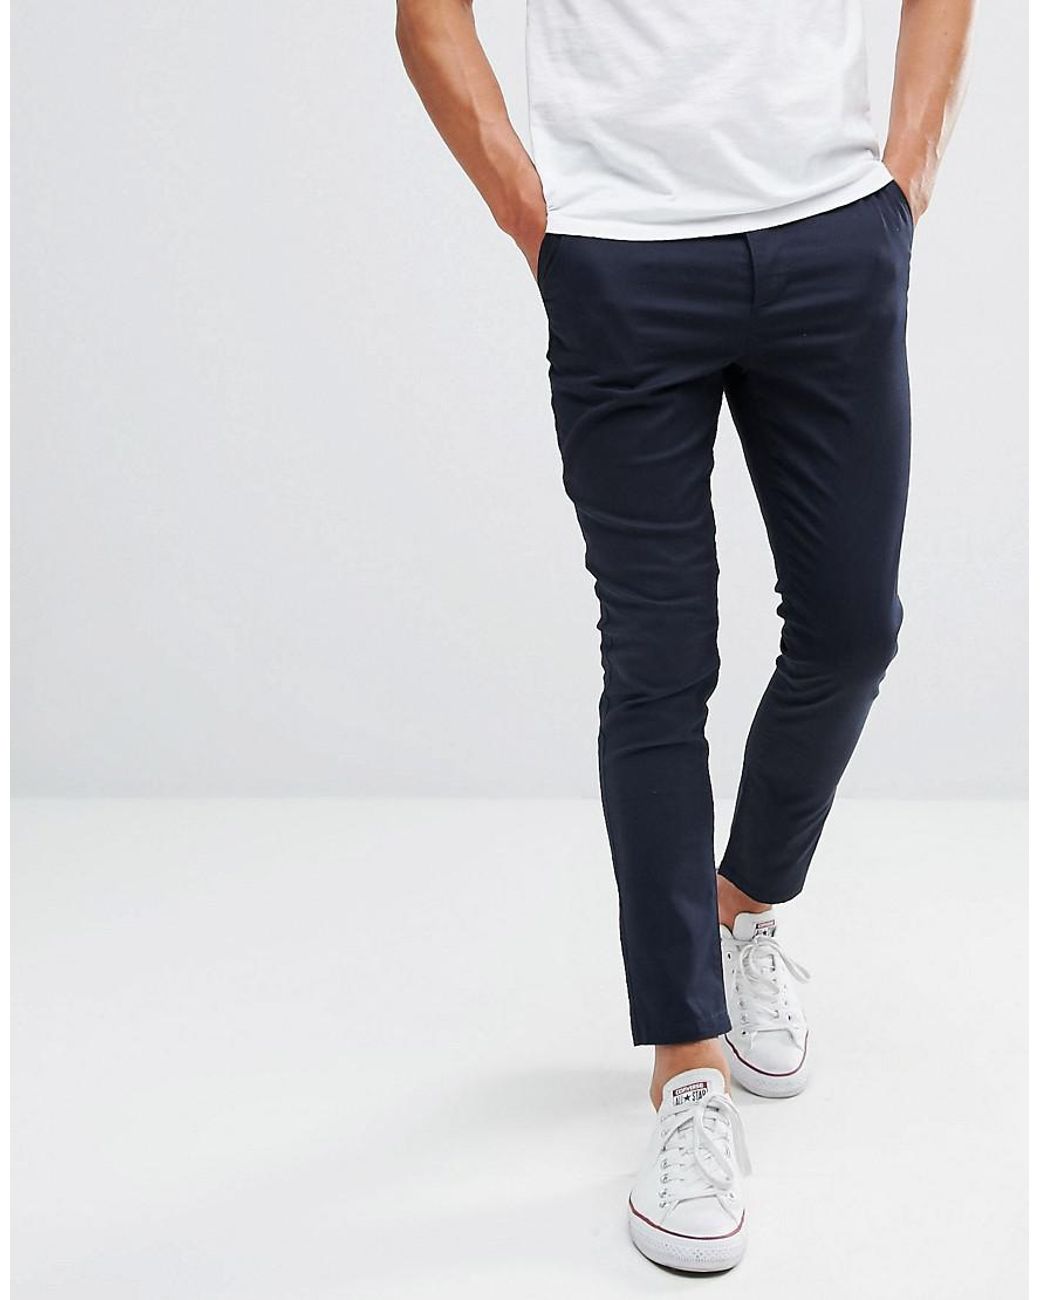 ASOS Cotton Super Skinny Cropped Chinos In Navy in Blue for Men - Lyst